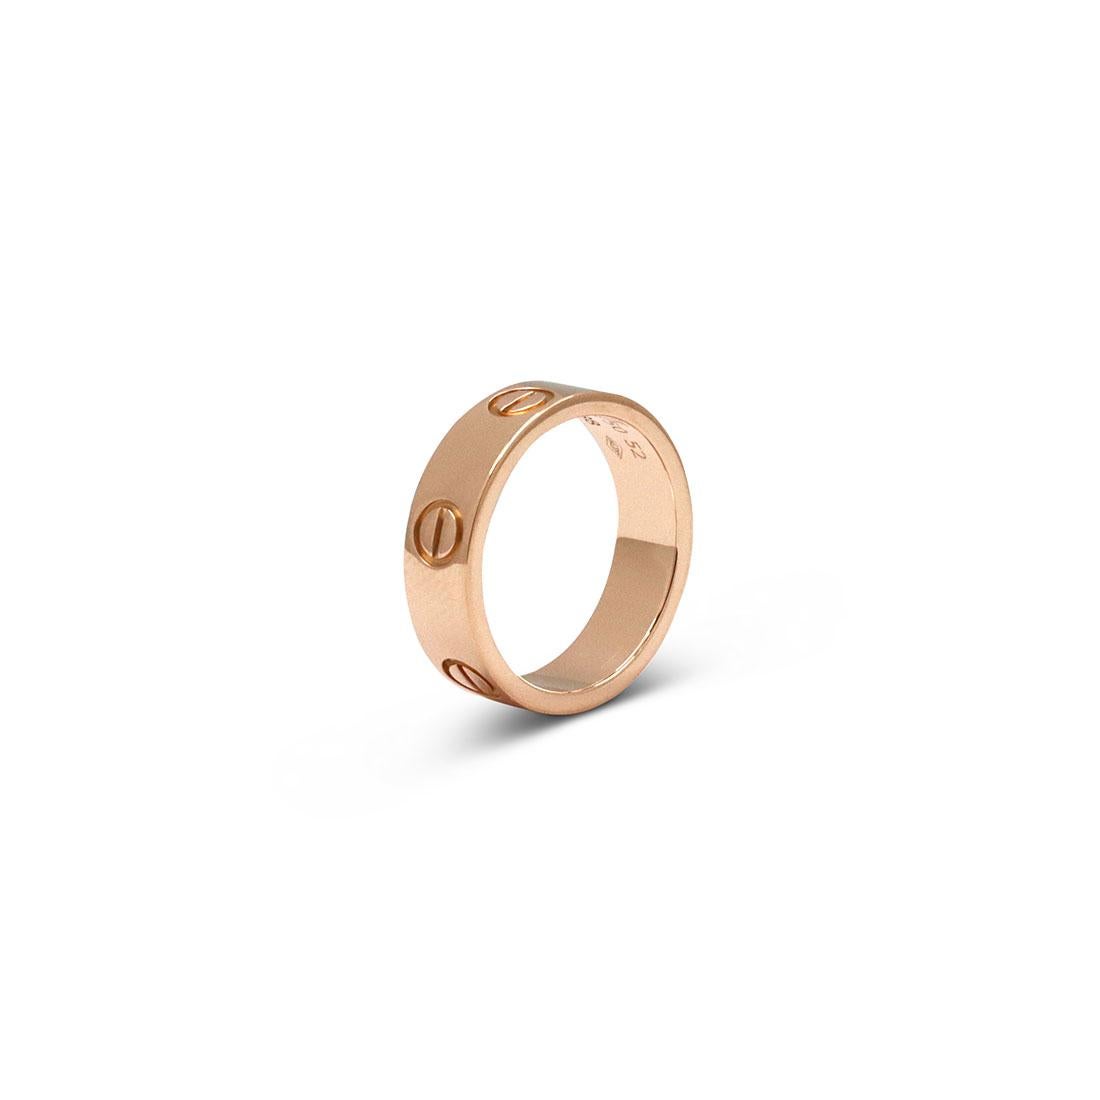 Authentic Cartier 'Love' band crafted in 18 karat rose gold. Signed Cartier, 52, 750, with serial number and hallmark. Ring size 52 (US 6). The band is presented with the original box and no papers. CIRCA 2010s.

Brand: Cartier
Collection: